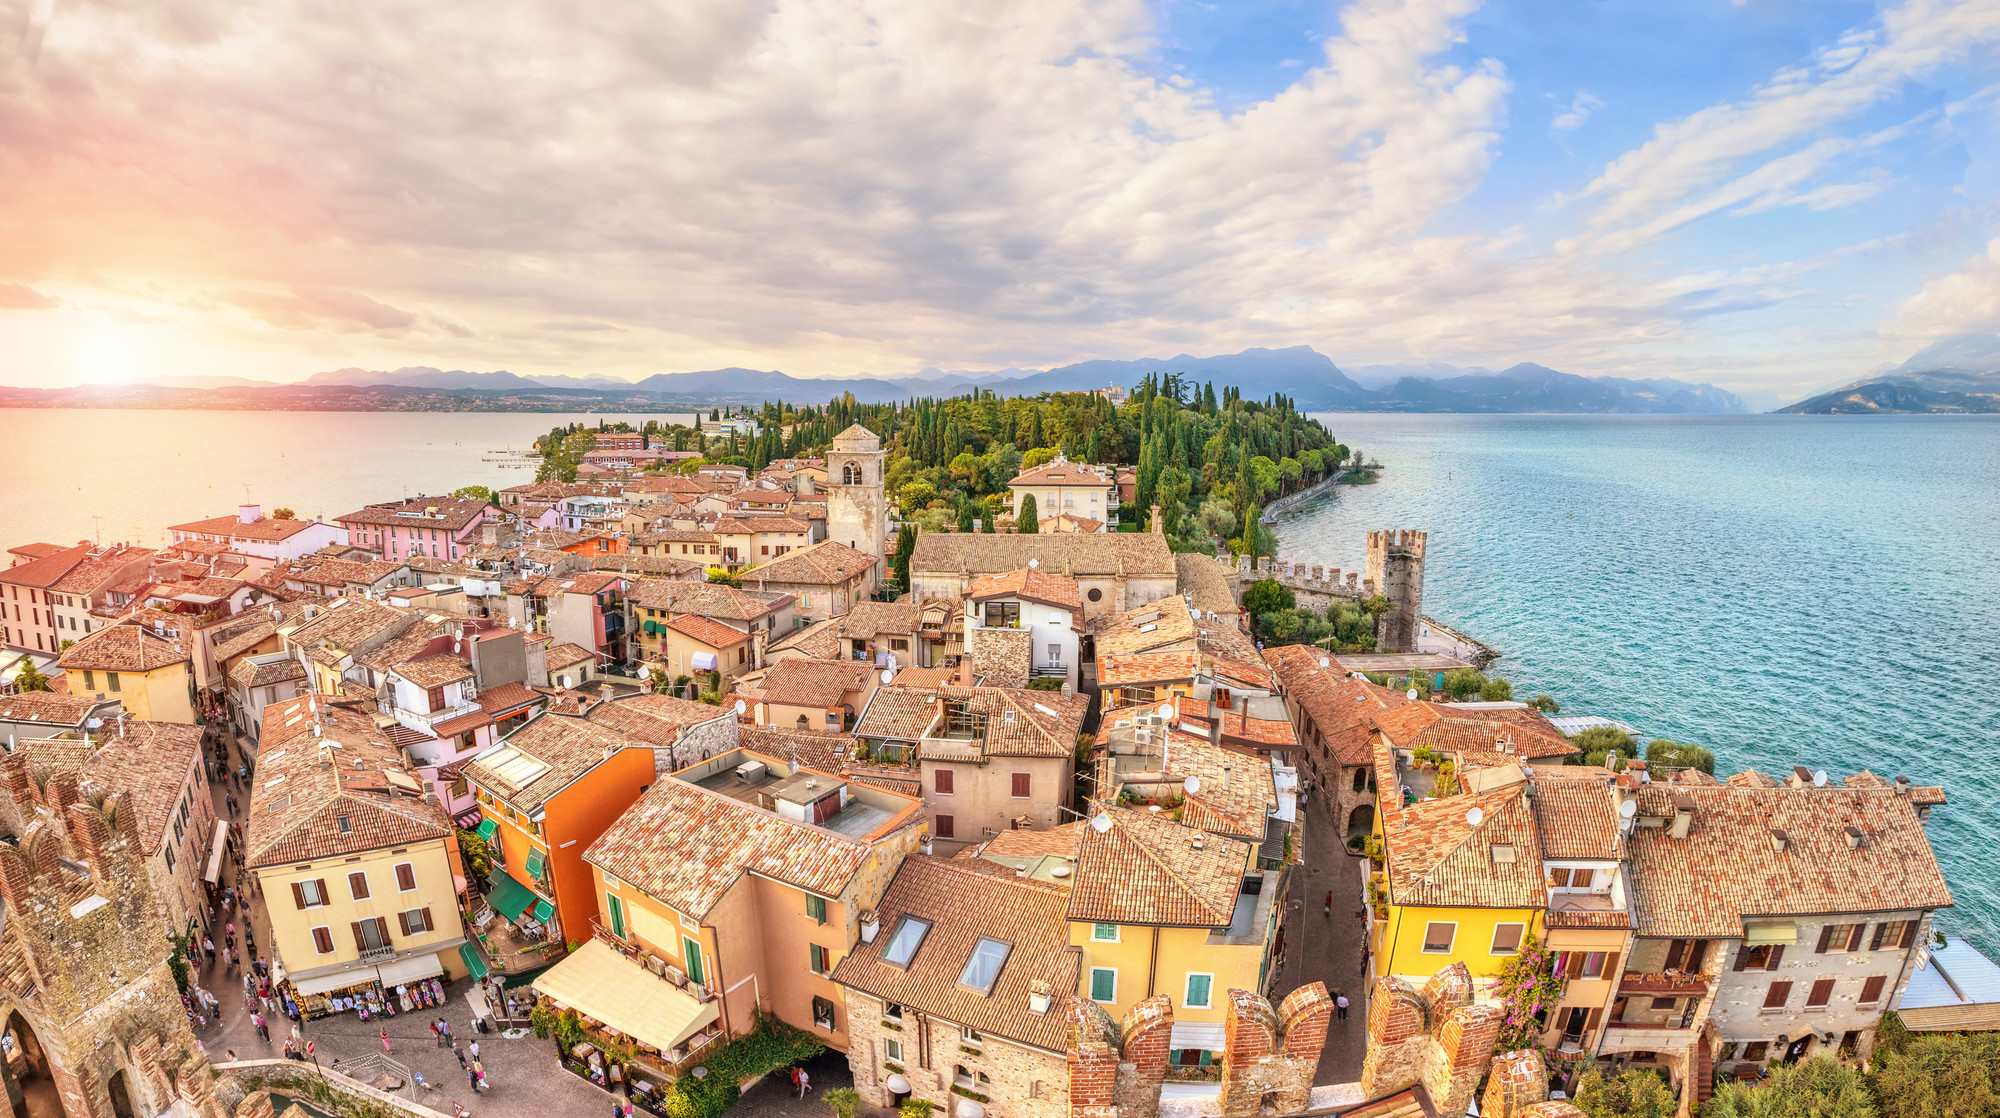 Panoramic view of the historical town Sirmione. Best towns and spas to visit in lake garda, SpaDreams